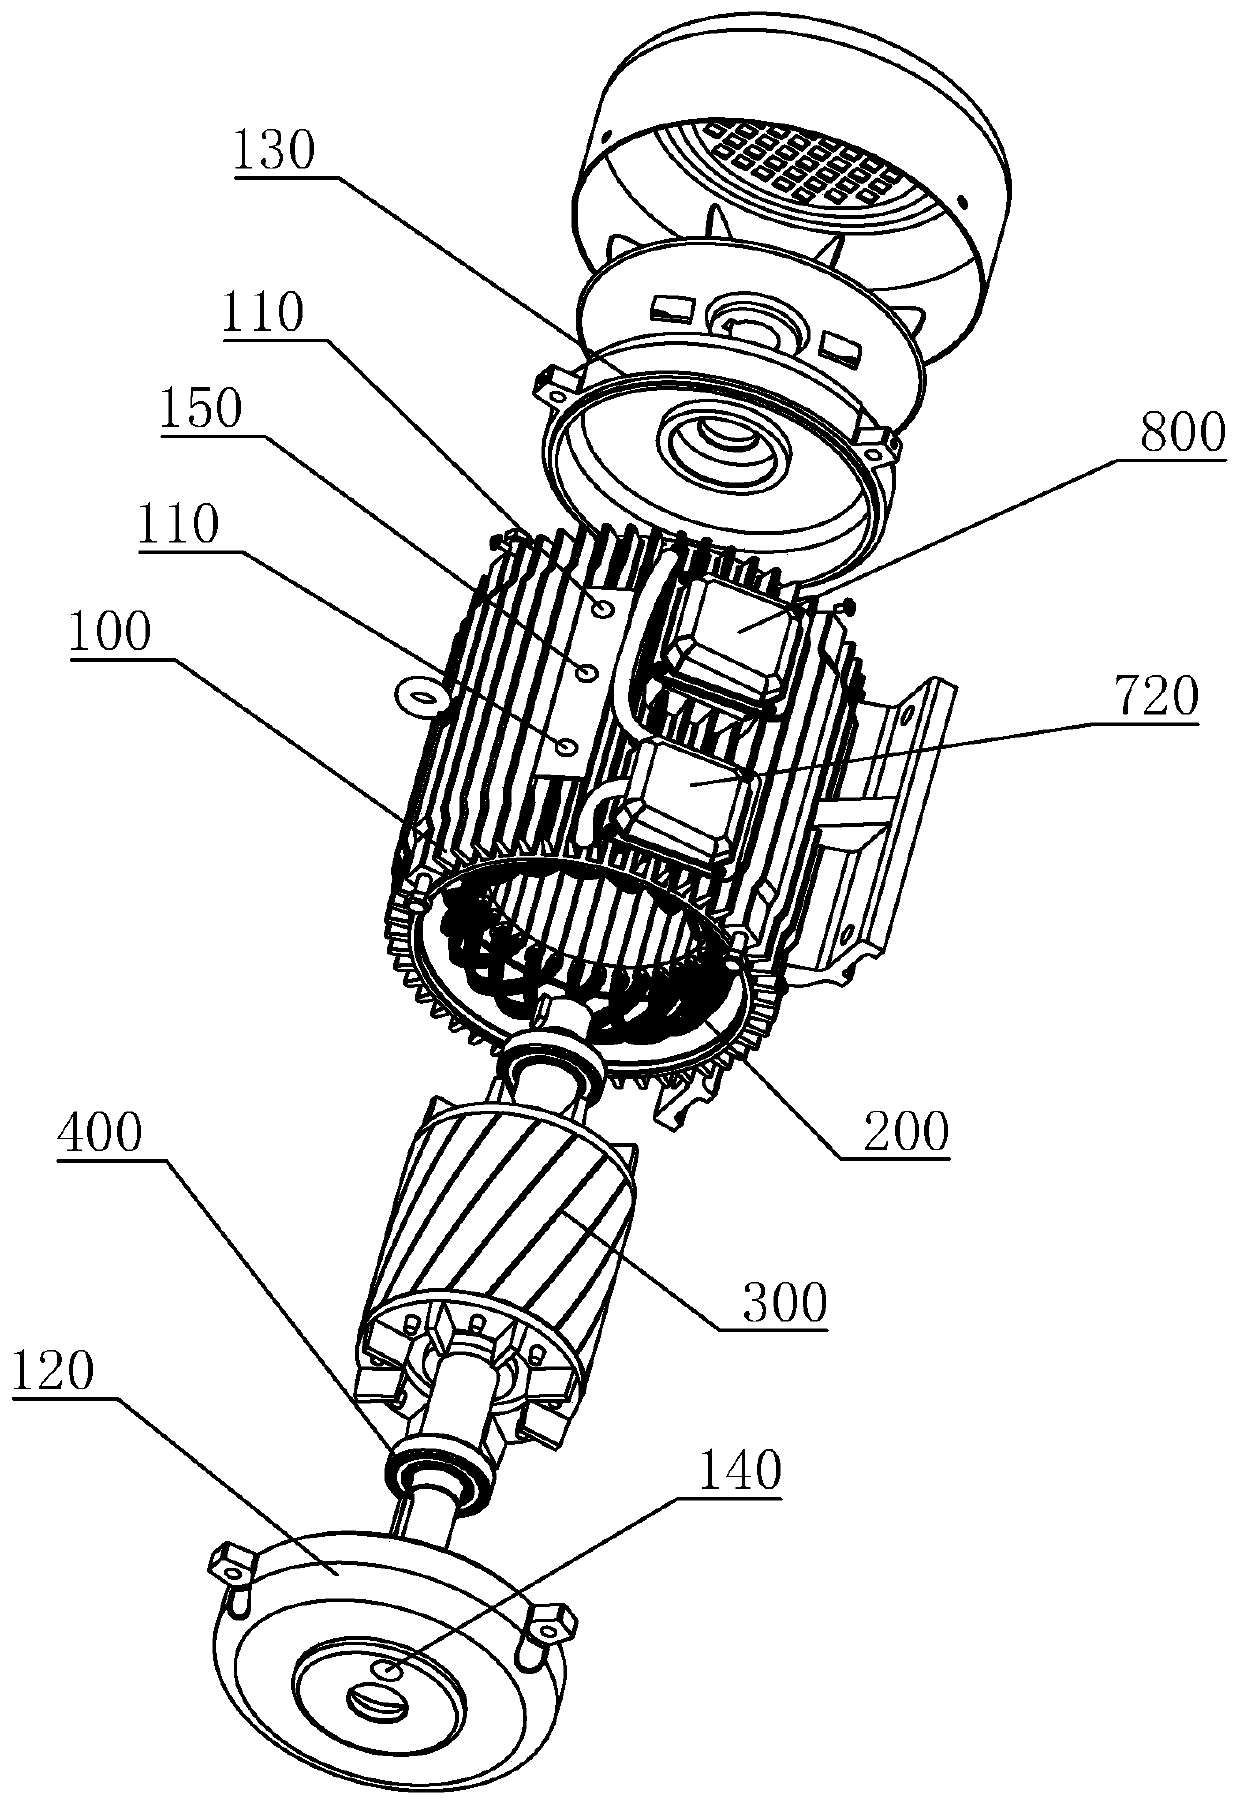 Motor with communication function